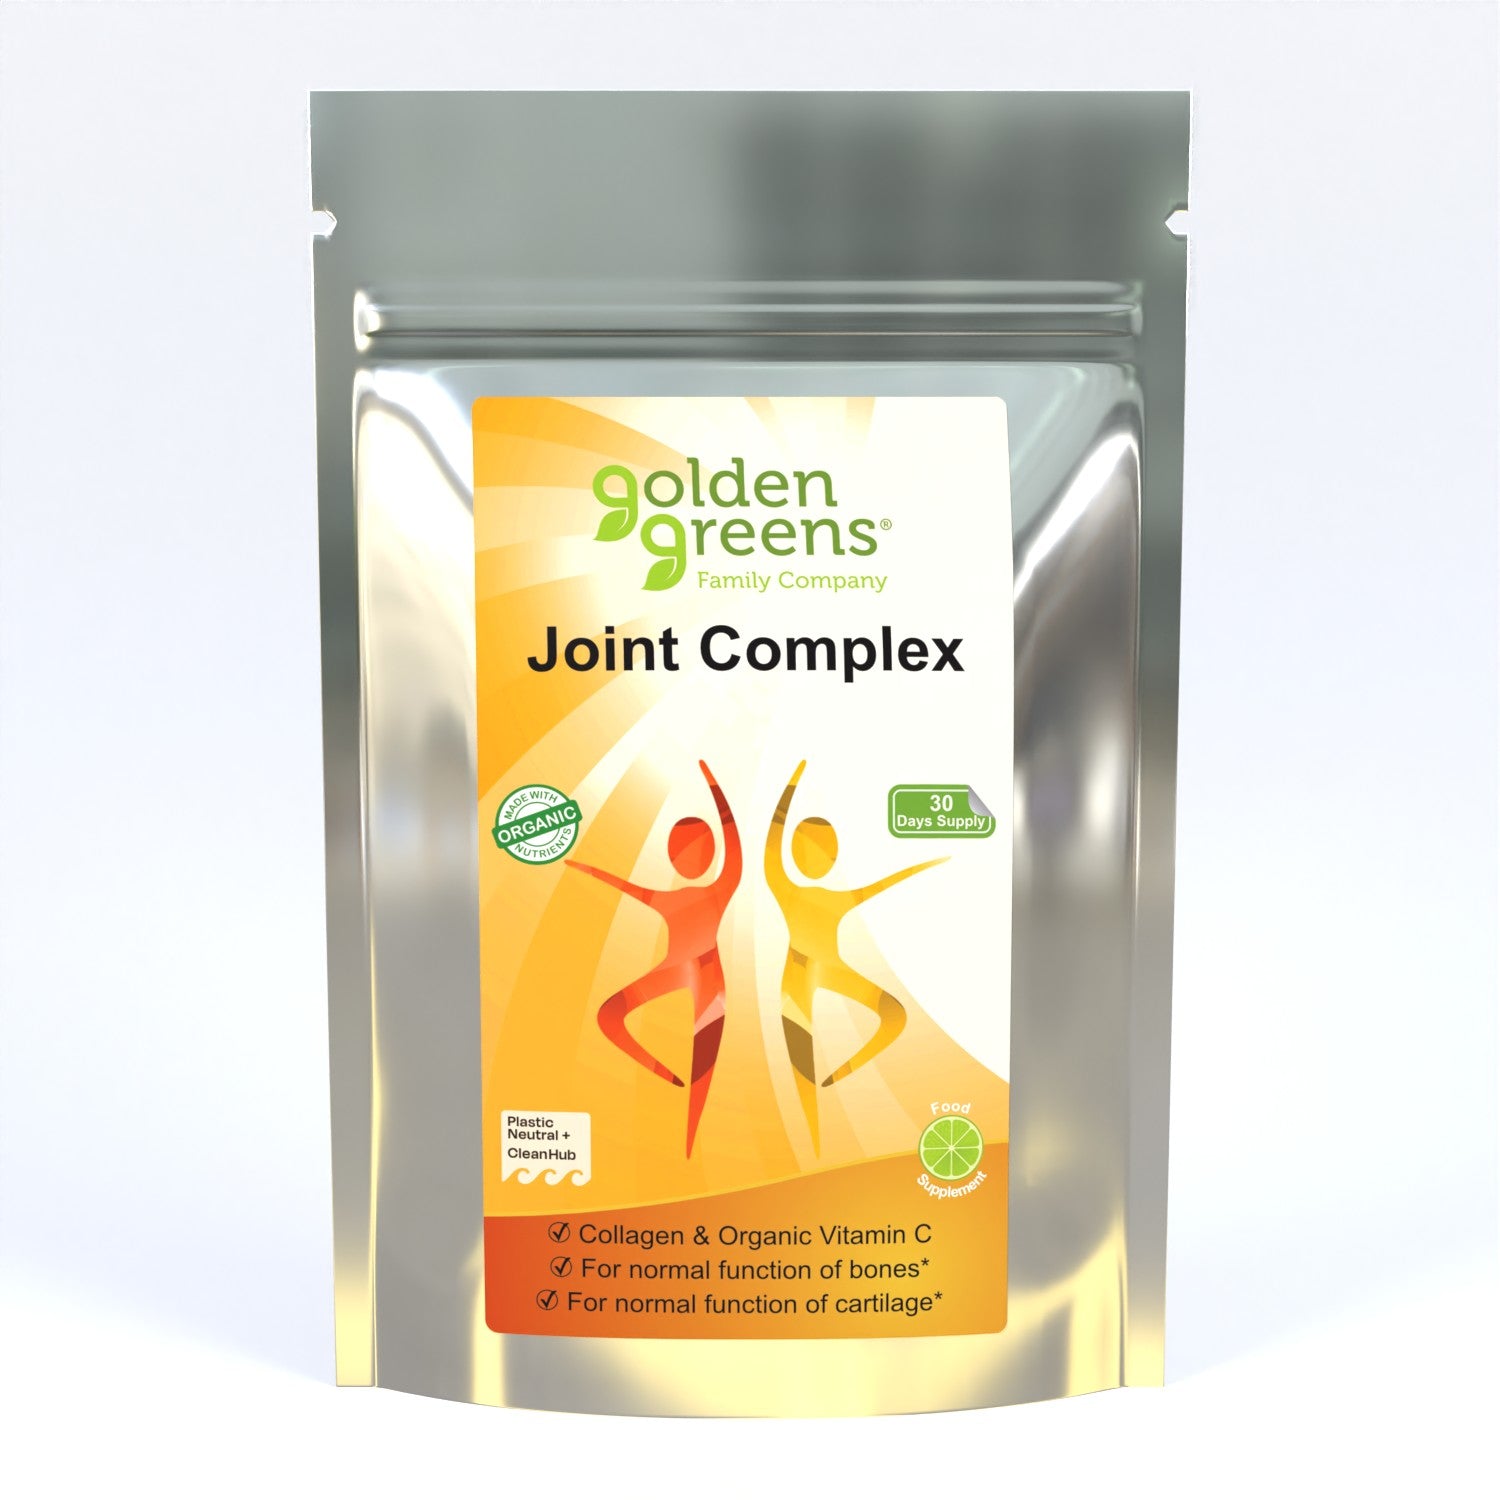 View Collagen Joint Support information